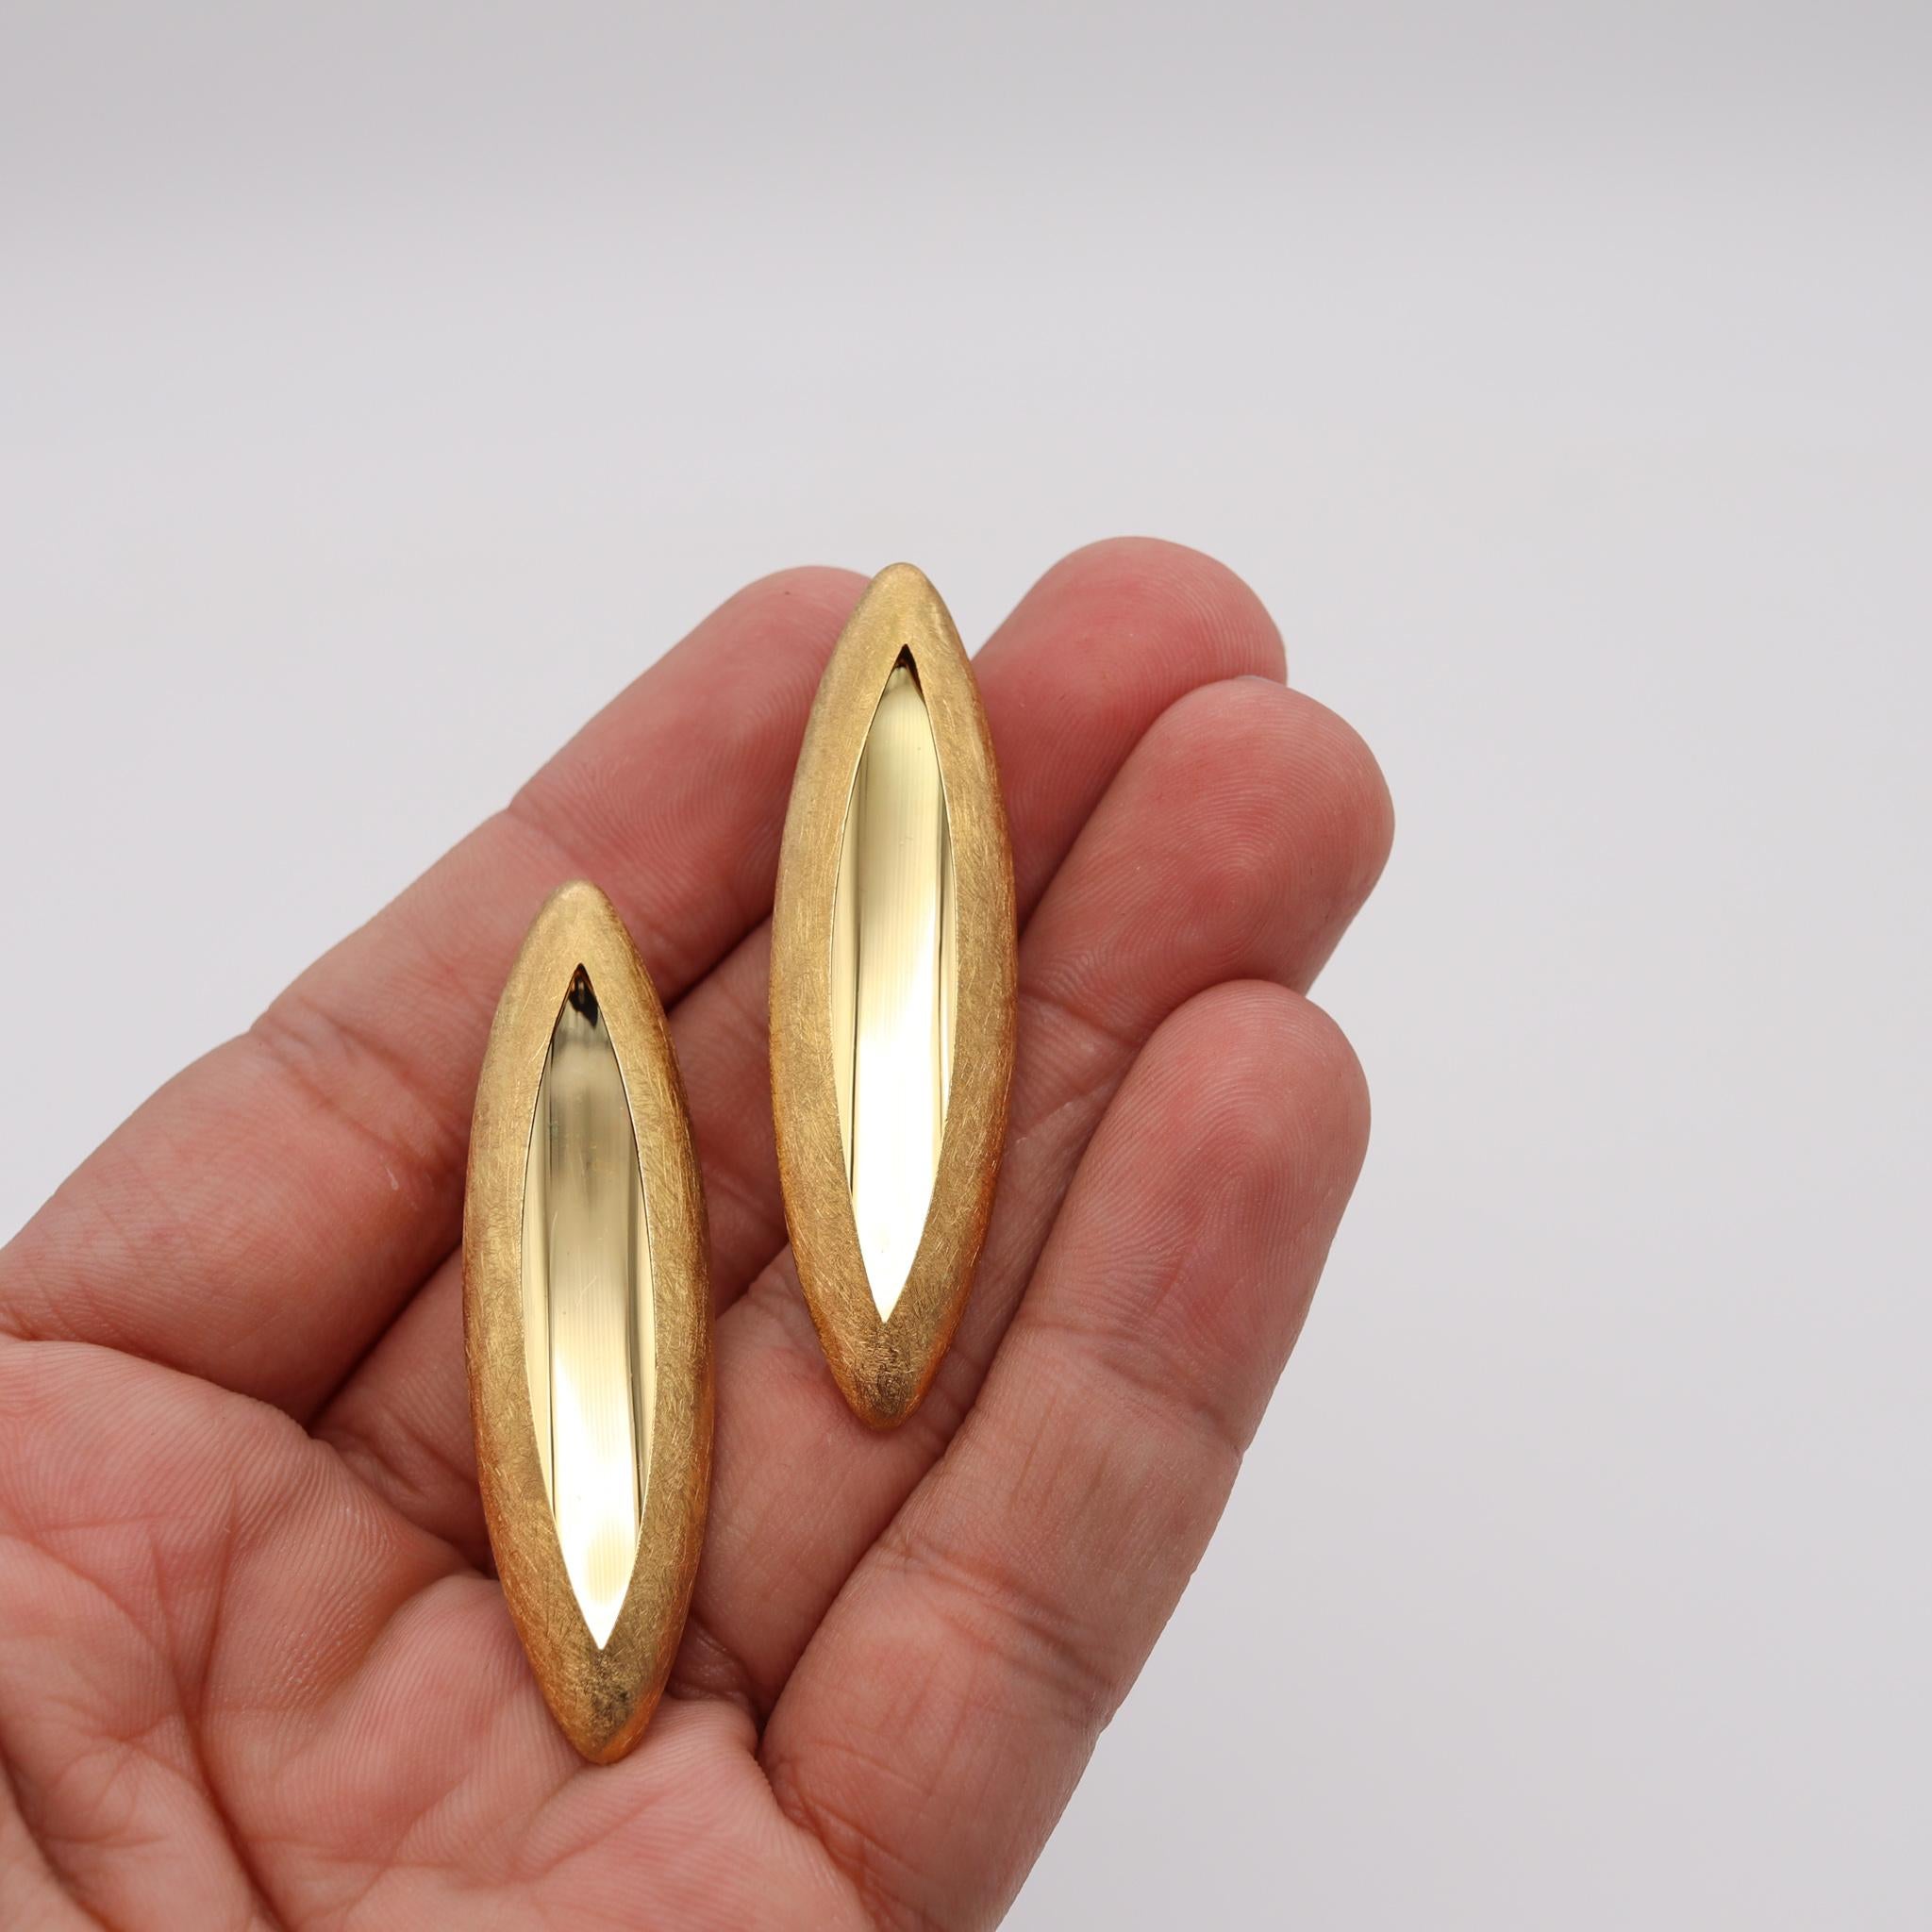 Torpedo earrings designed by Anish Kapoor (1954-).

An exceptional piece of wearable art, designed by the famed British-Indian artist Anish Kapoor. This large pair of Torpedo drop earrings has been carefully crafted in the United Kingdom in solid